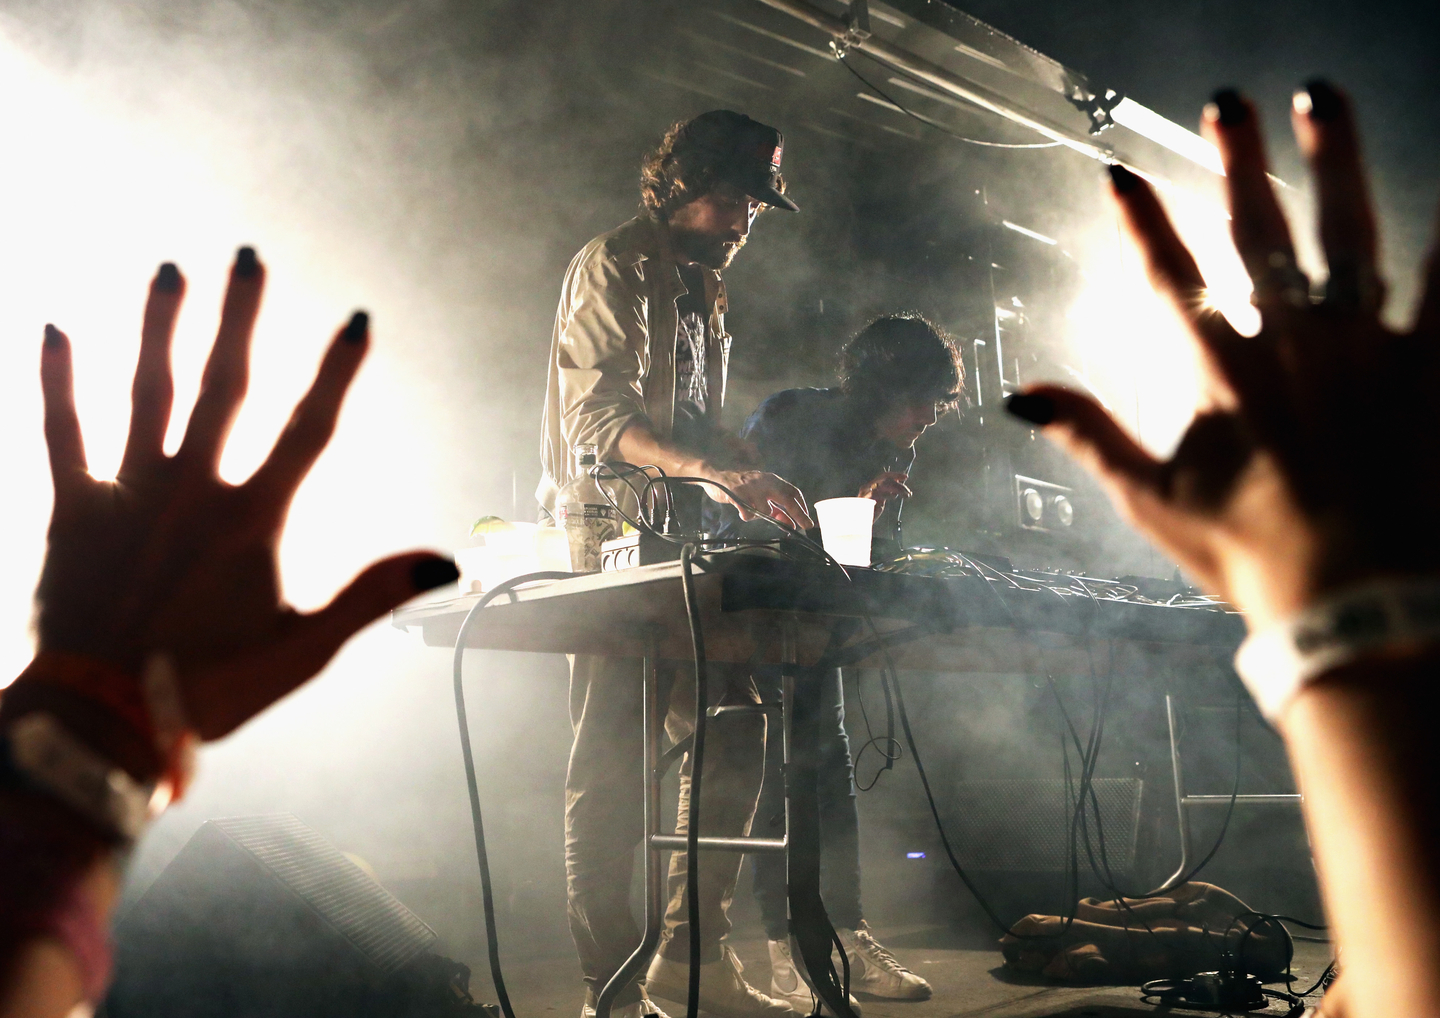 Gaspard Augé (L) and Xavier de Rosnay of Justice perform onstage at The Main.